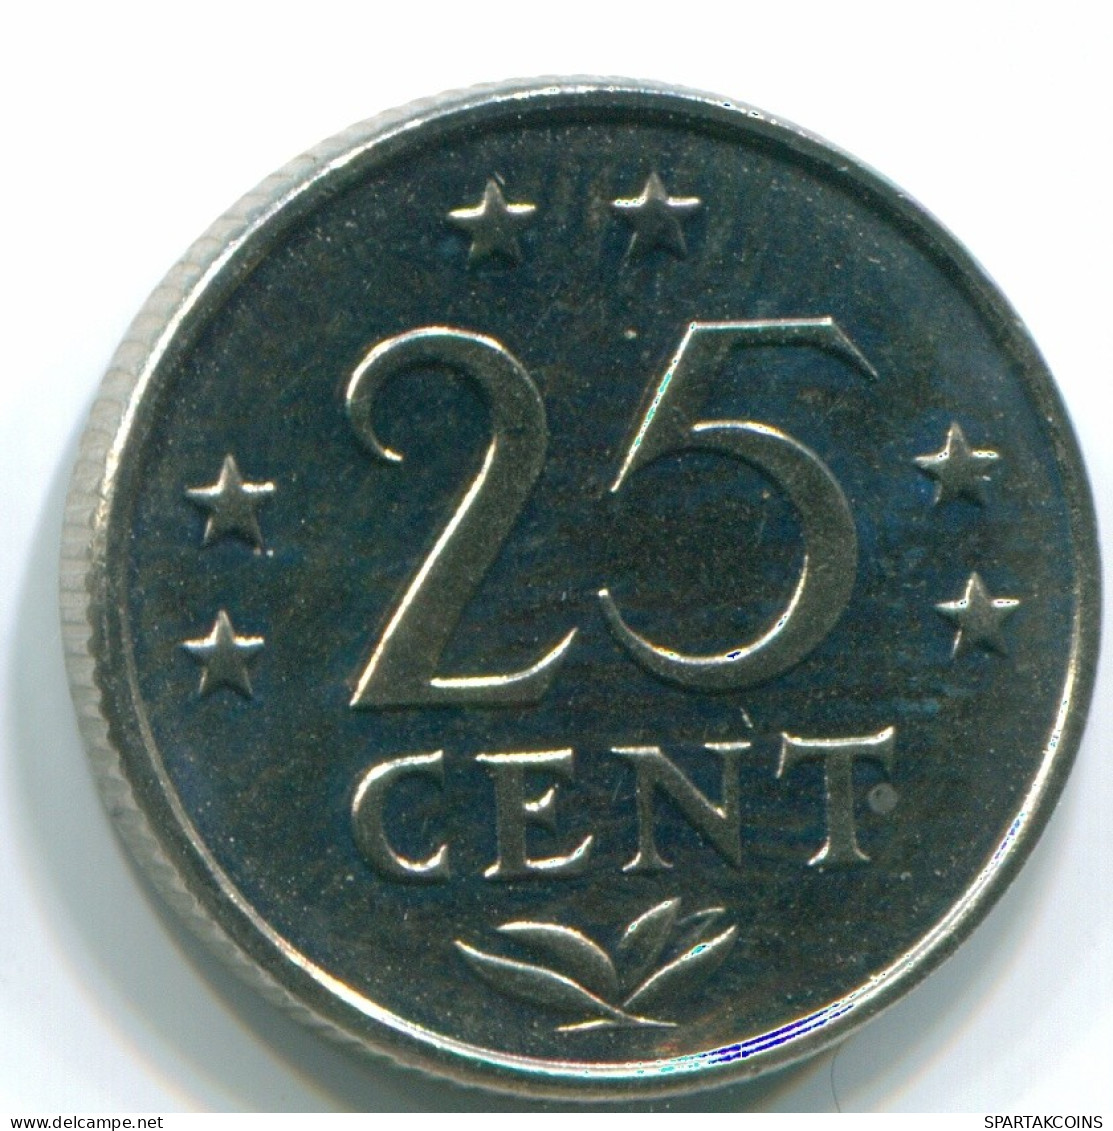 25 CENTS 1979 NETHERLANDS ANTILLES Nickel Colonial Coin #S11651.U.A